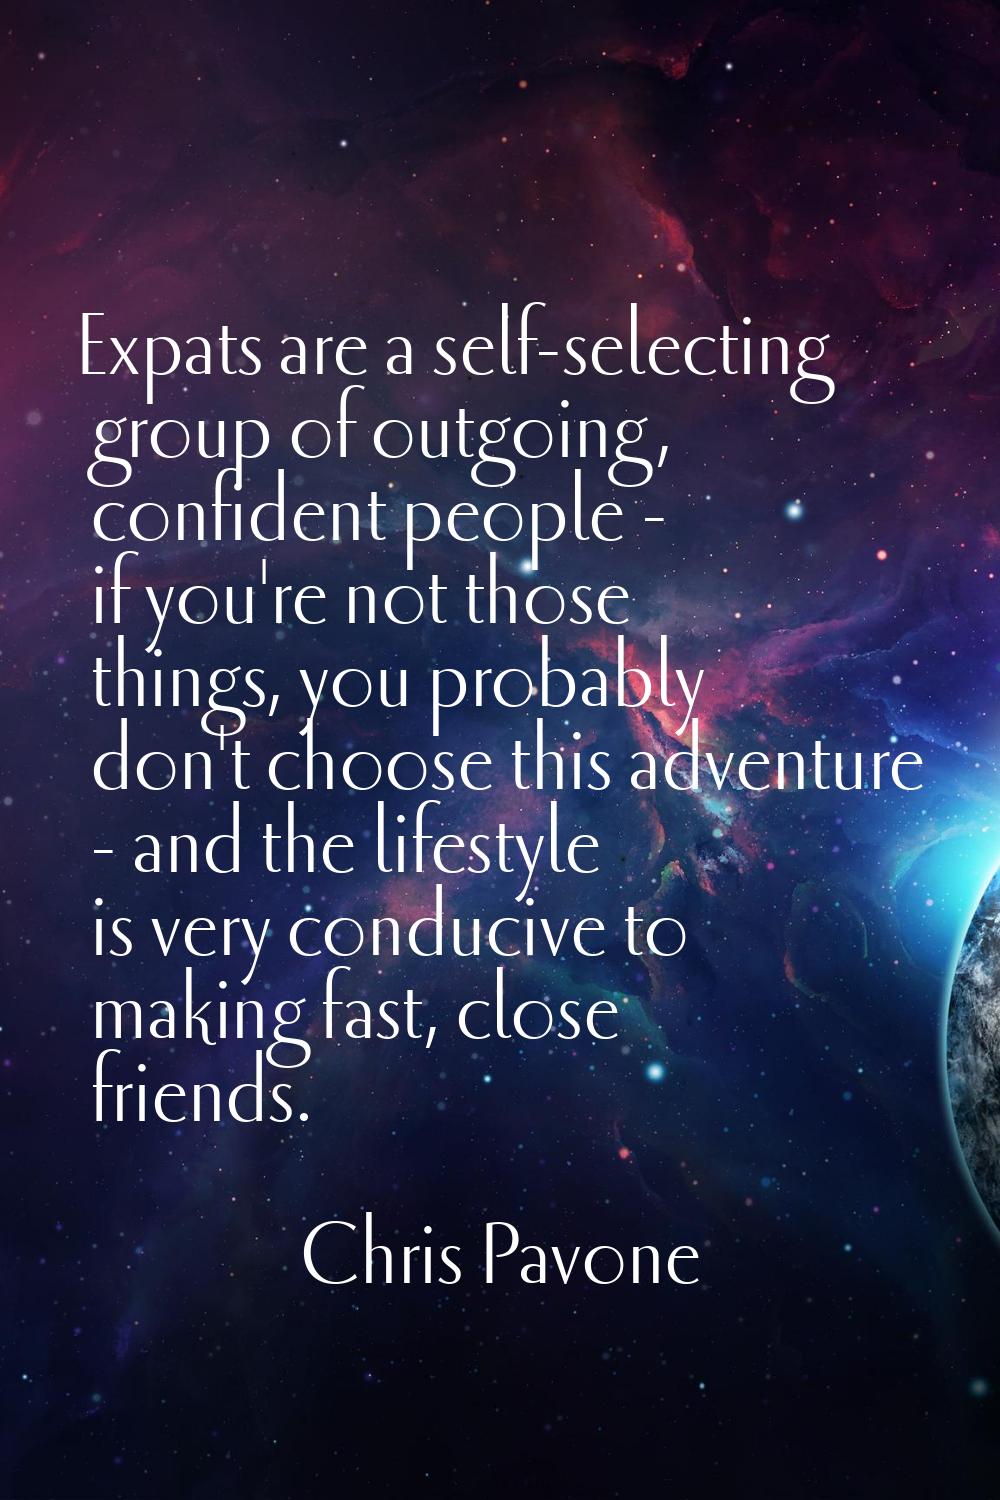 Expats are a self-selecting group of outgoing, confident people - if you're not those things, you p